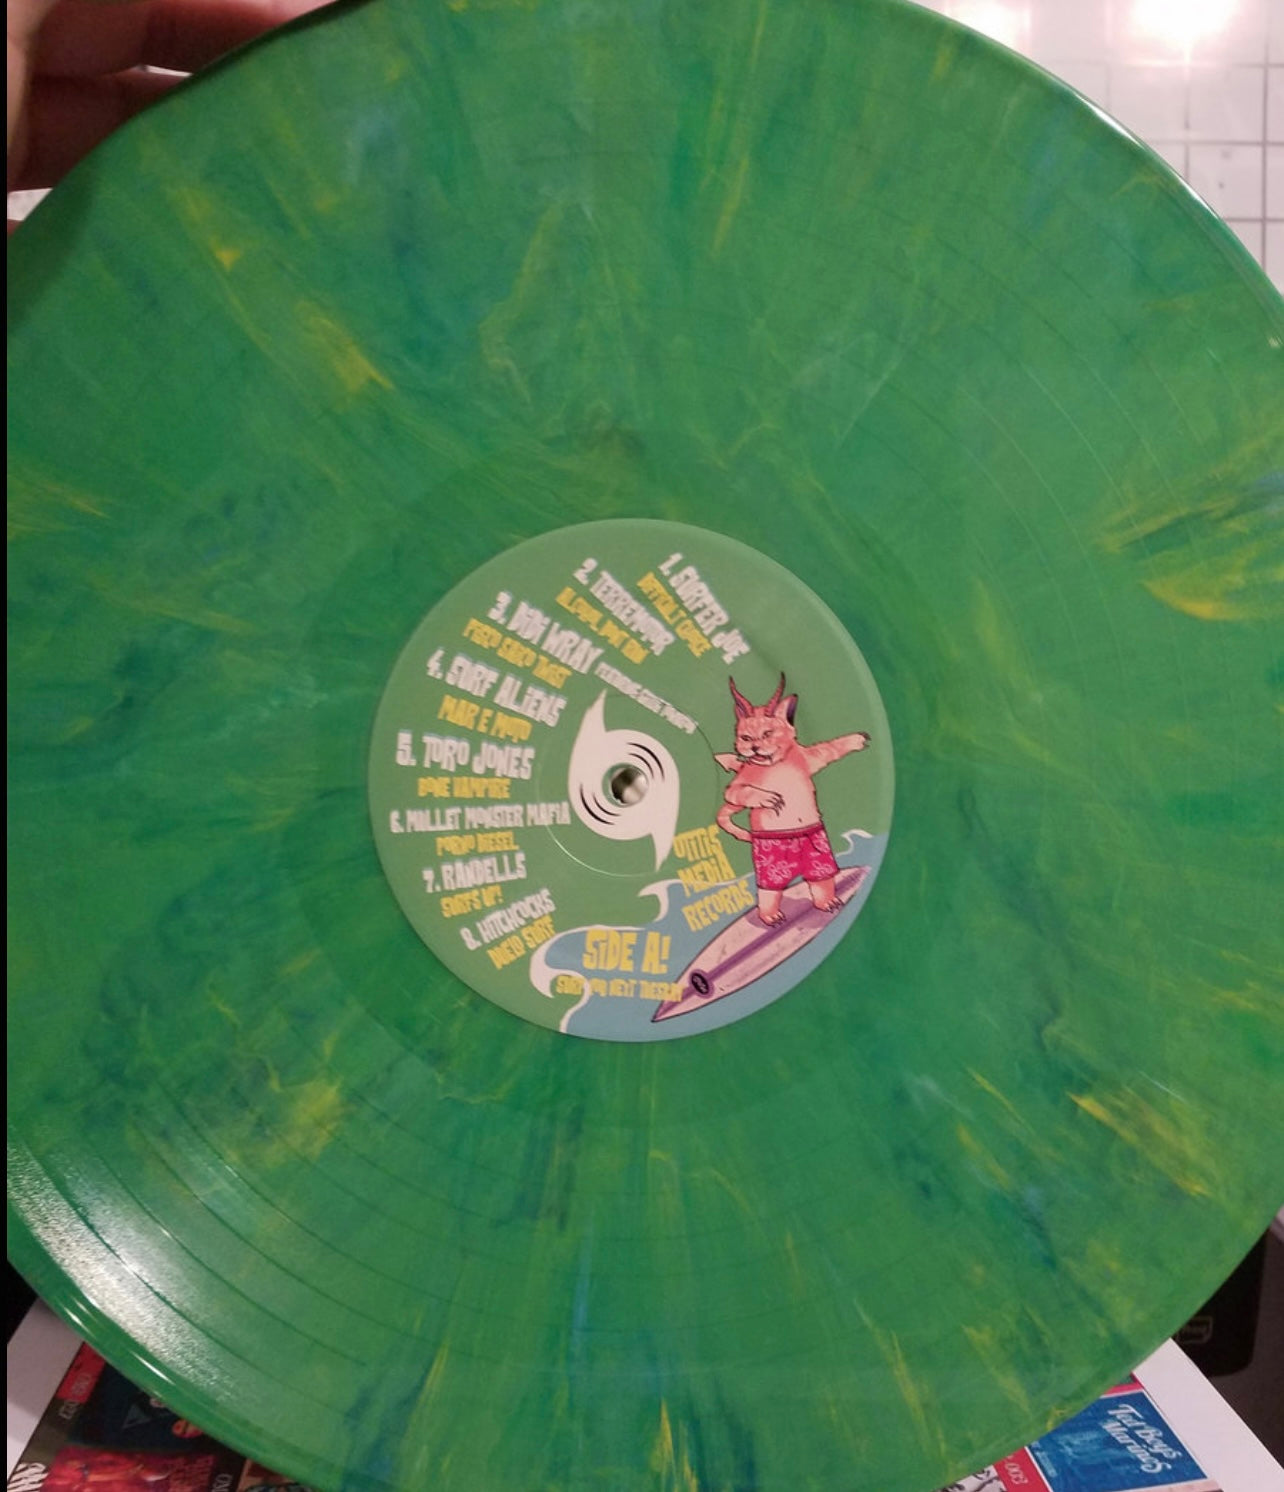 OMR-020 SURF YOU NEXT TUESDAY! (An OMR Compilation) 12 inch Random Colored Vinyl